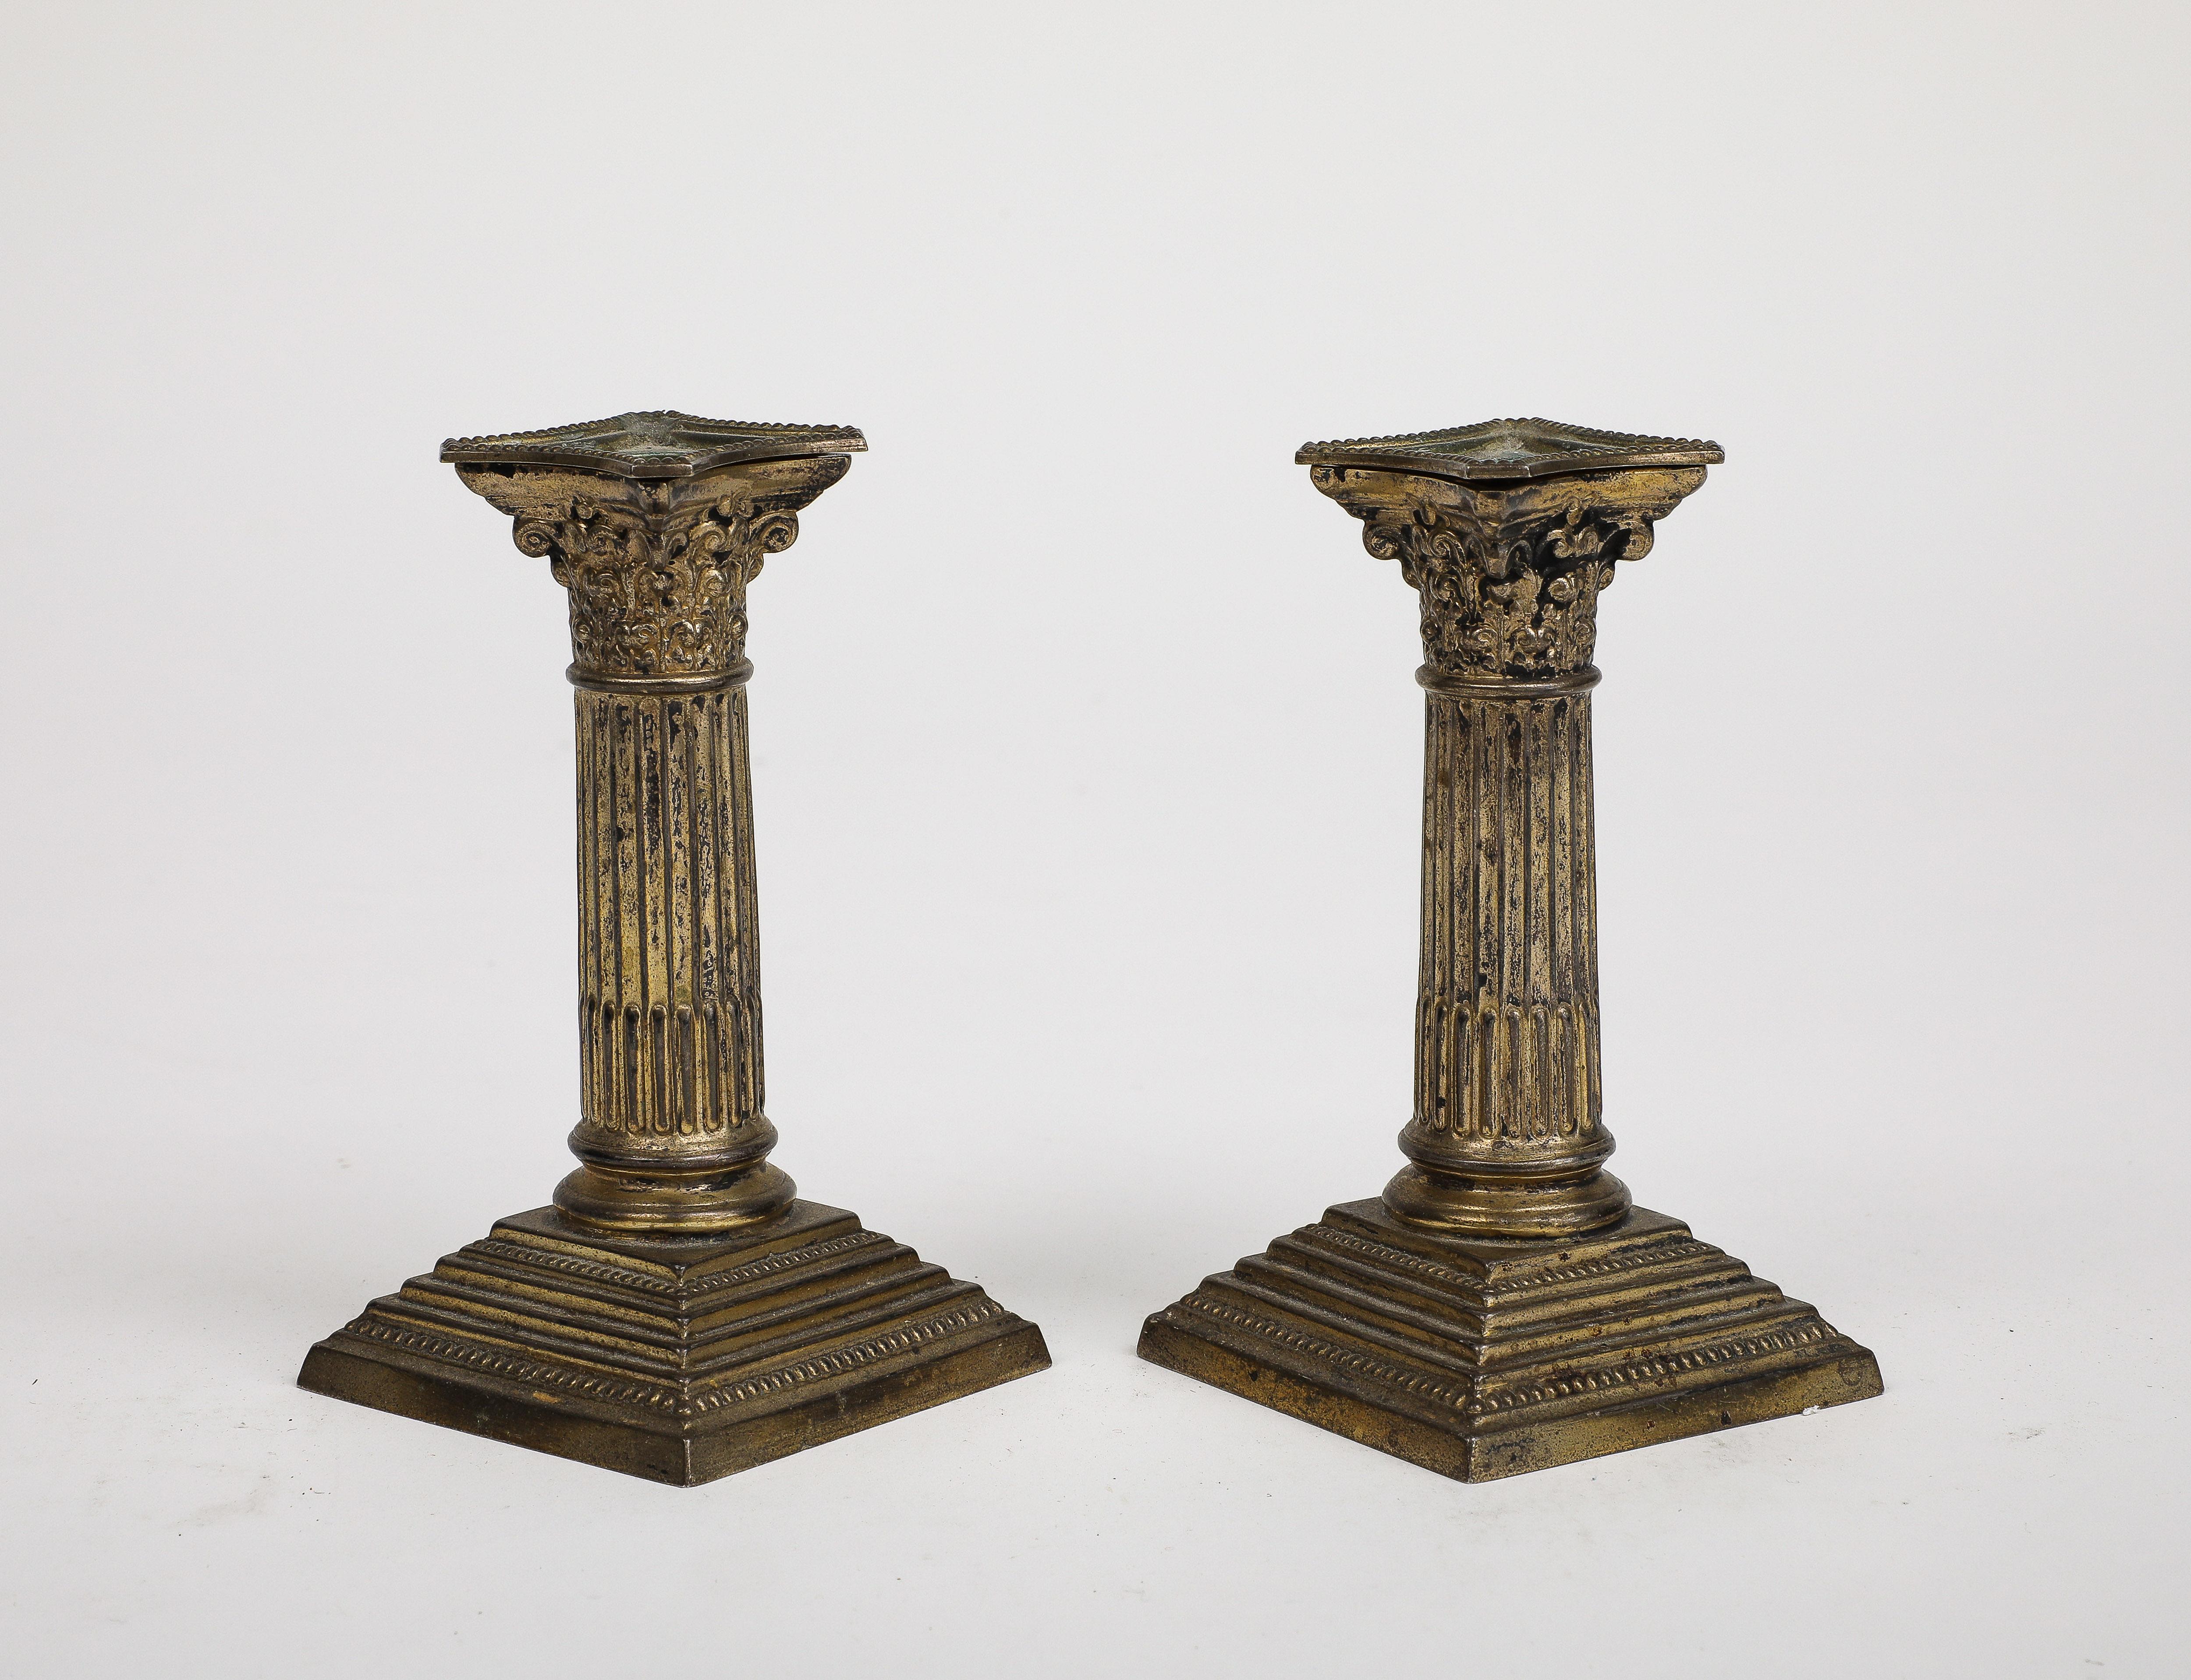 Pair of Midcentury Stone and Brass Column Candlesticks, circa 1950 For Sale 4